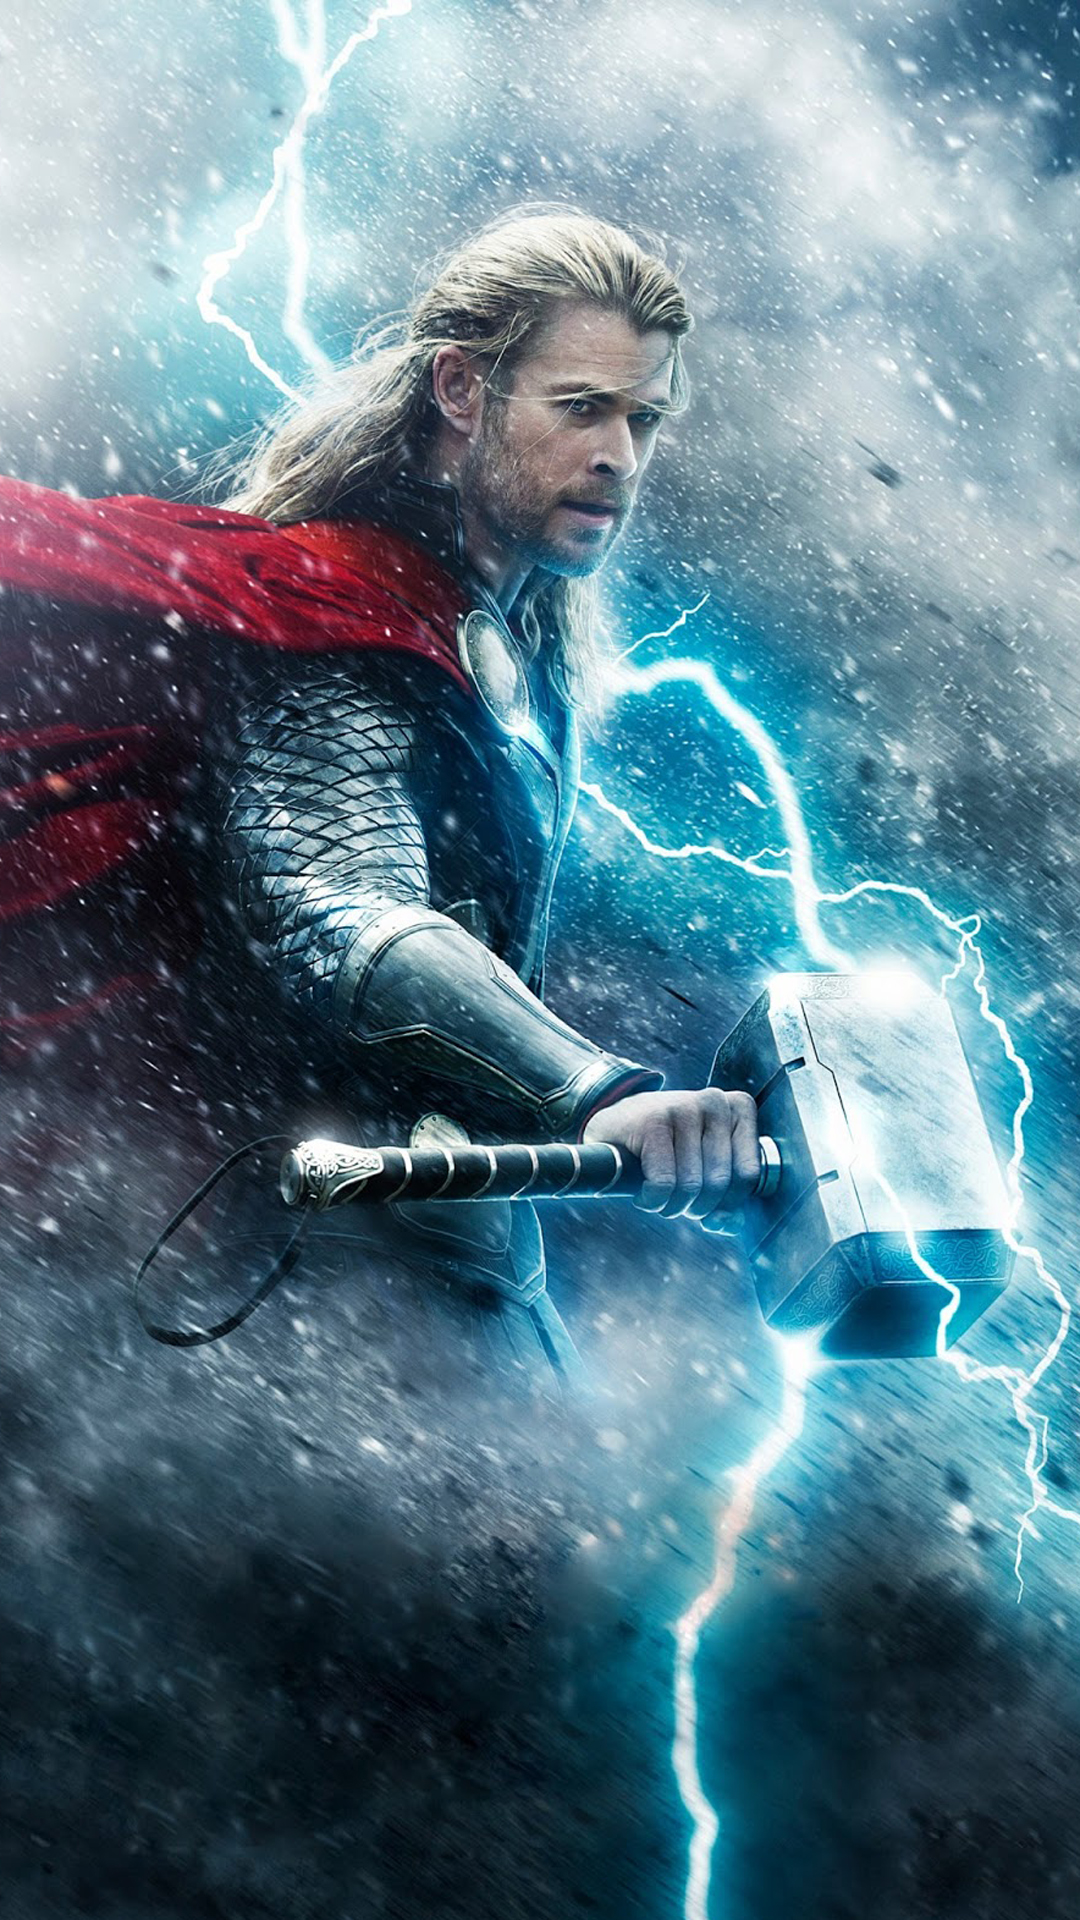 1080x1920 Art Thor The Dark World Iphone 7,6s,6 Plus, Pixel xl ,One Plus  3,3t,5 HD 4k Wallpapers, Images, Backgrounds, Photos and Pictures